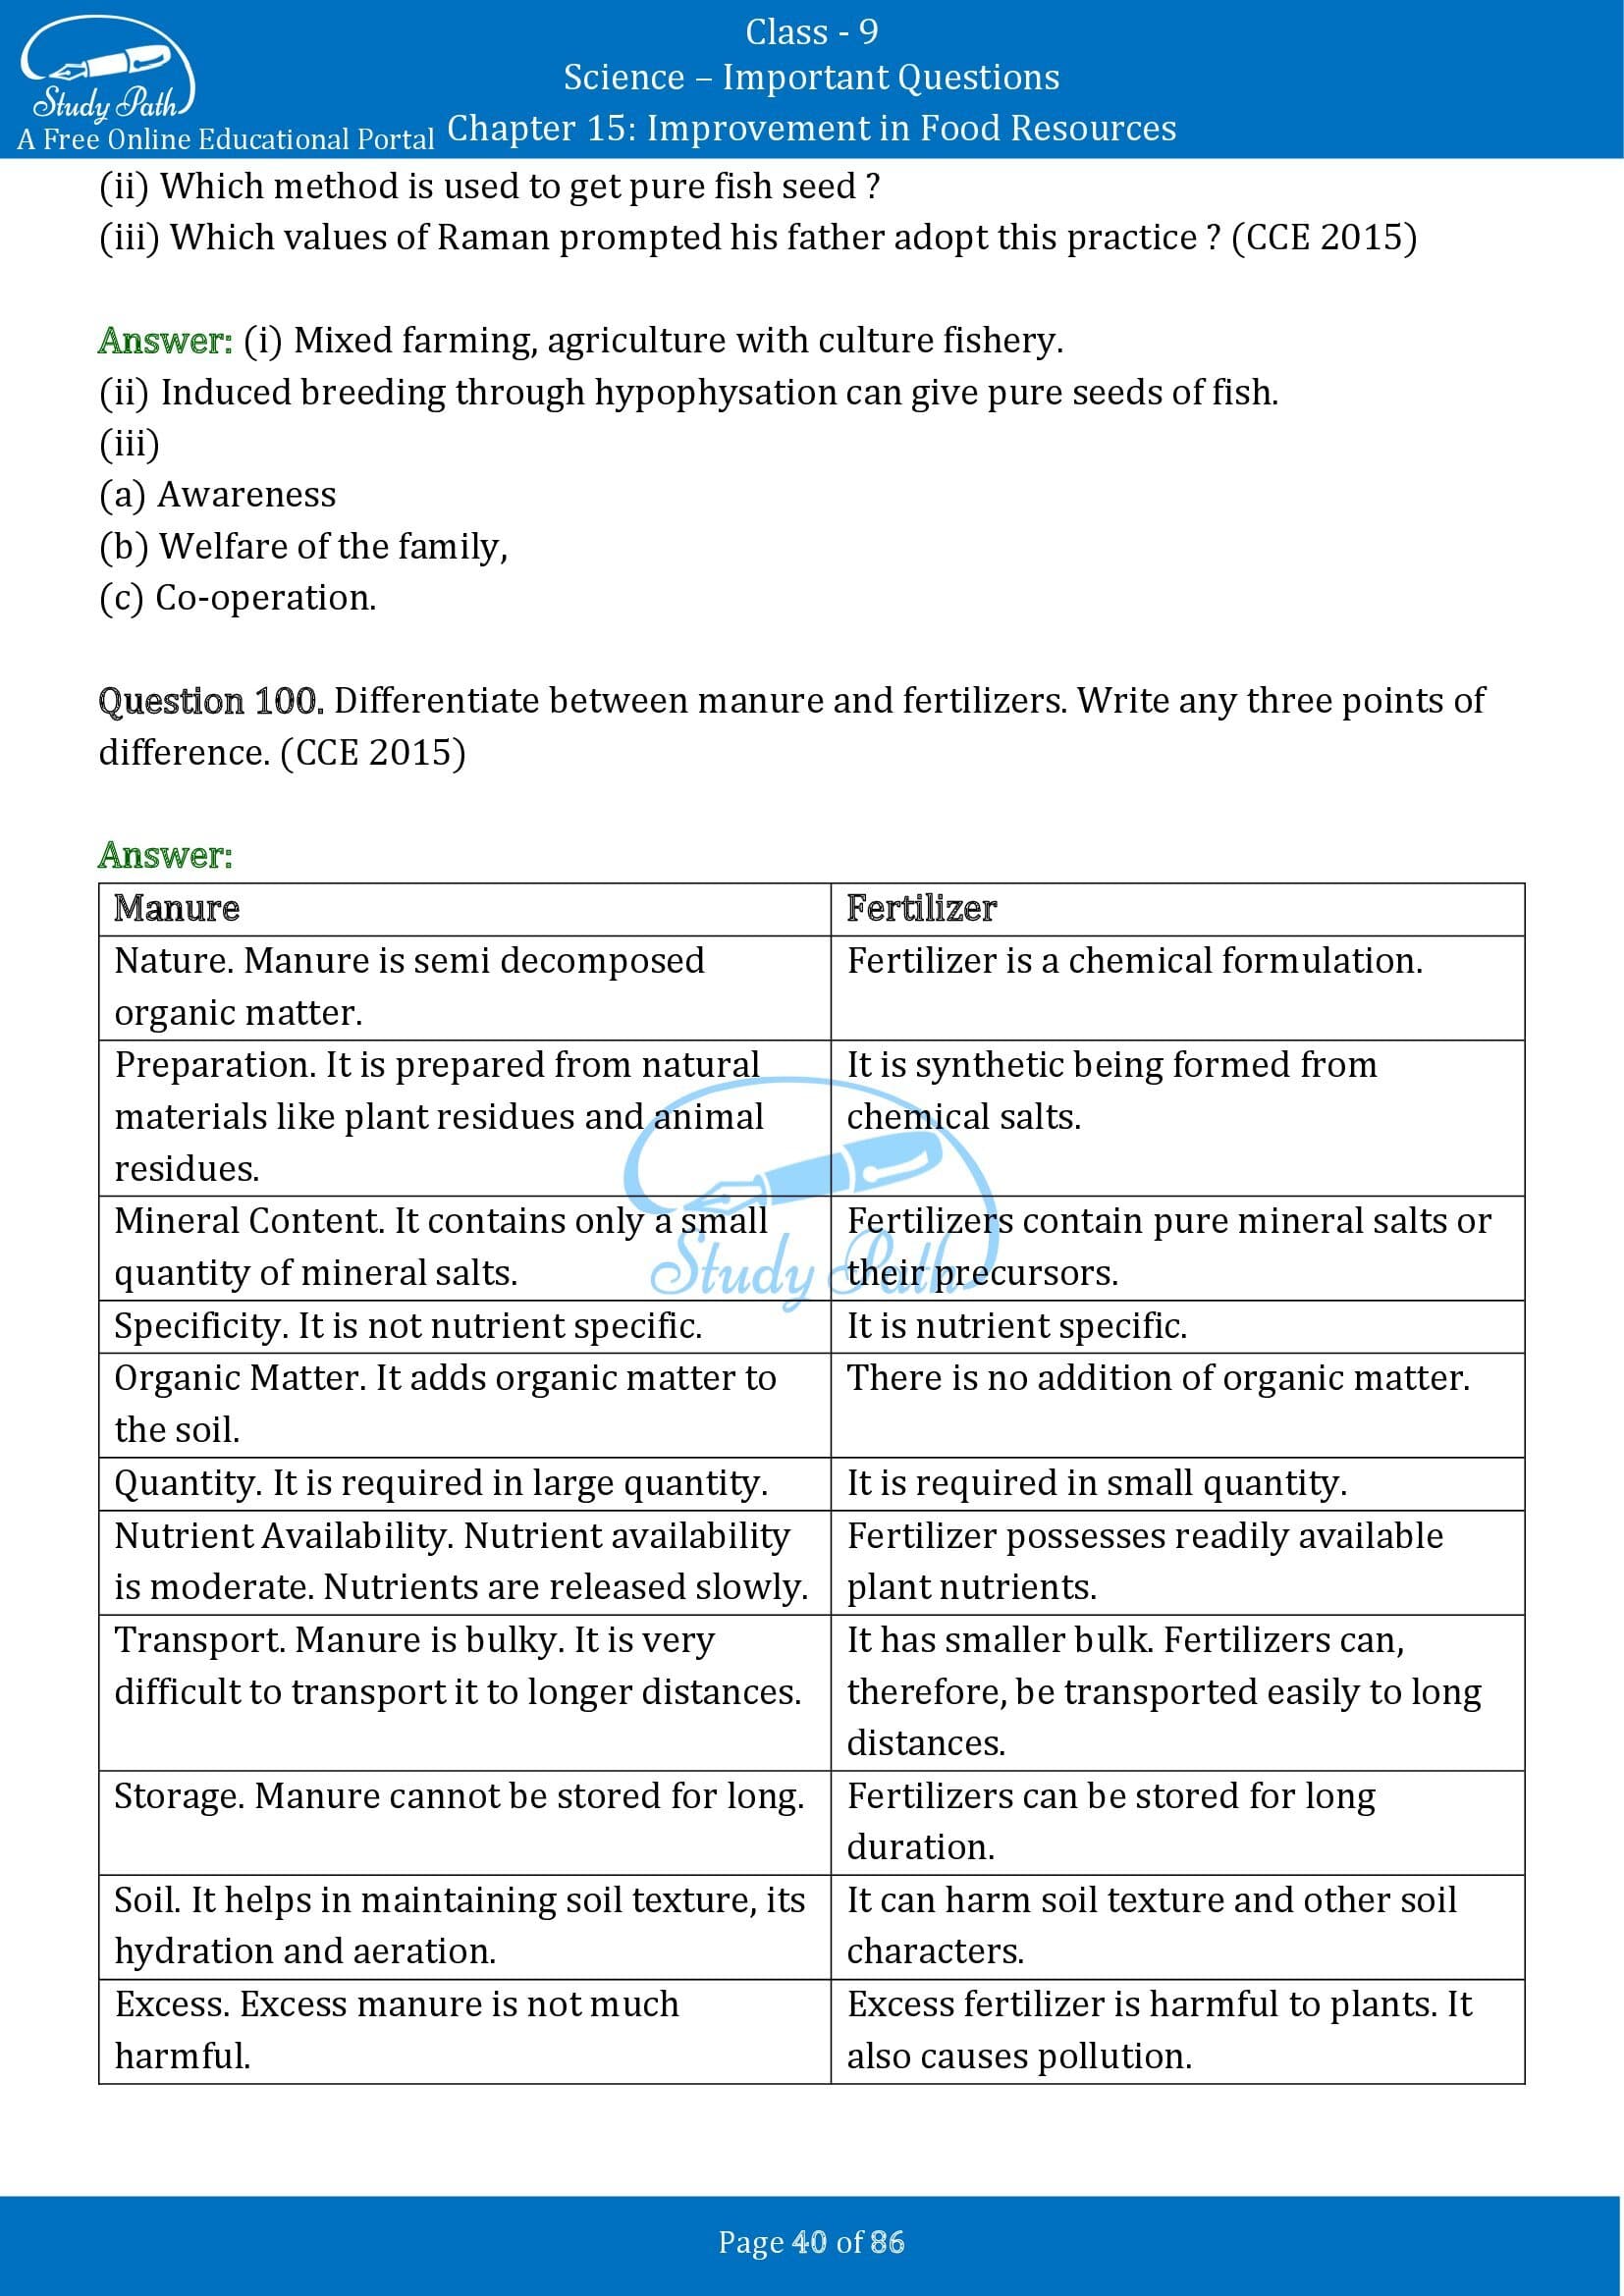 Important Questions for Class 9 Science Chapter 15 Improvement in Food Resources 00040